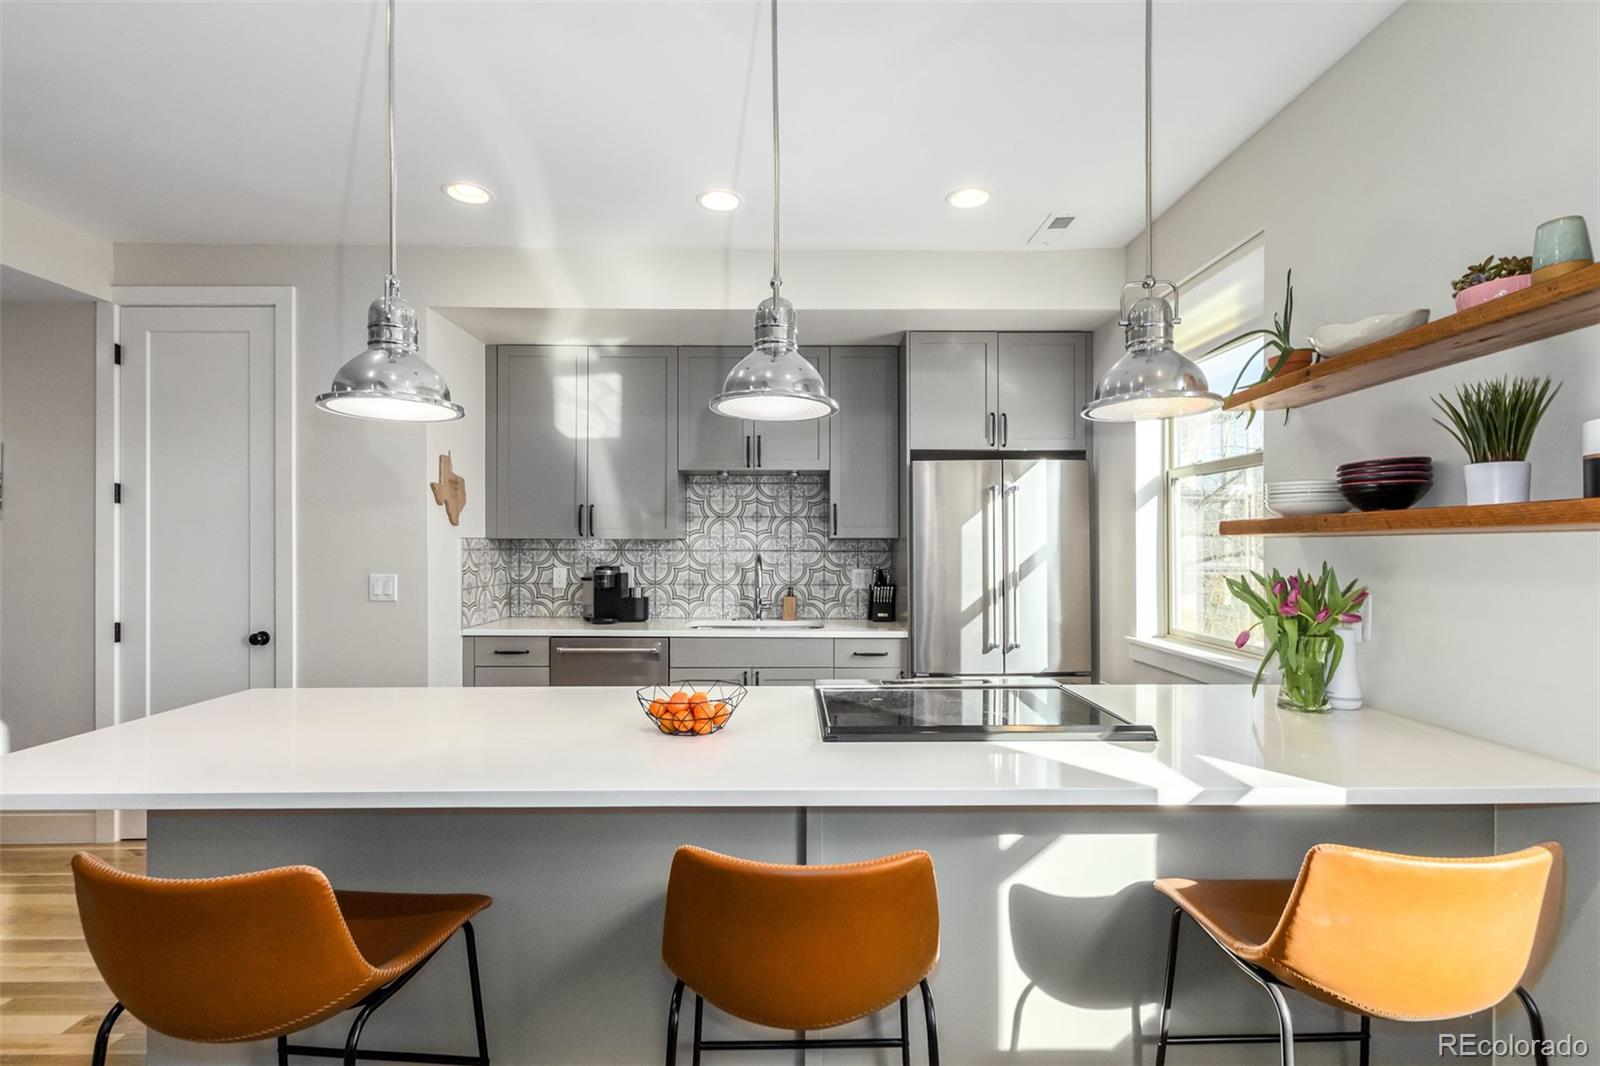 a kitchen with stainless steel appliances kitchen island granite countertop a dining table chairs and white cabinets